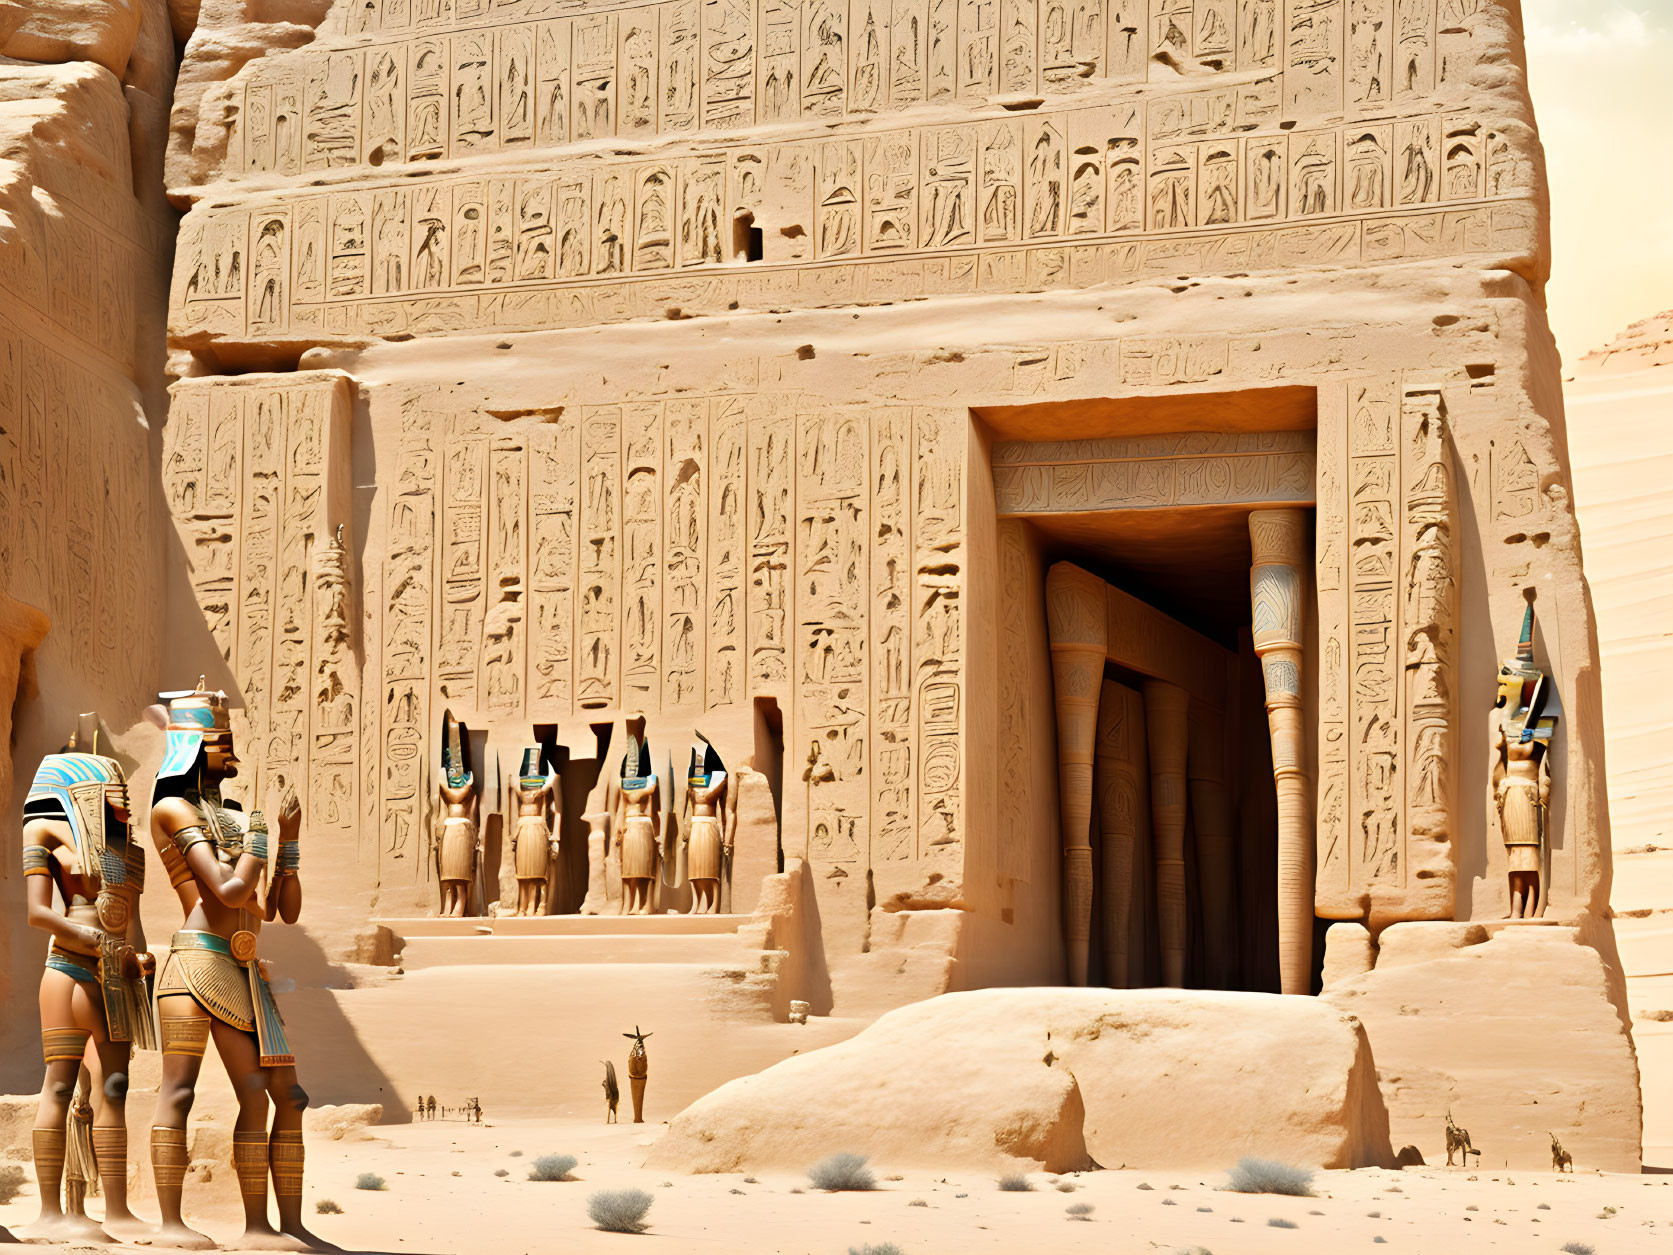 Ancient Egyptian temple with hieroglyphs, statues, and figures